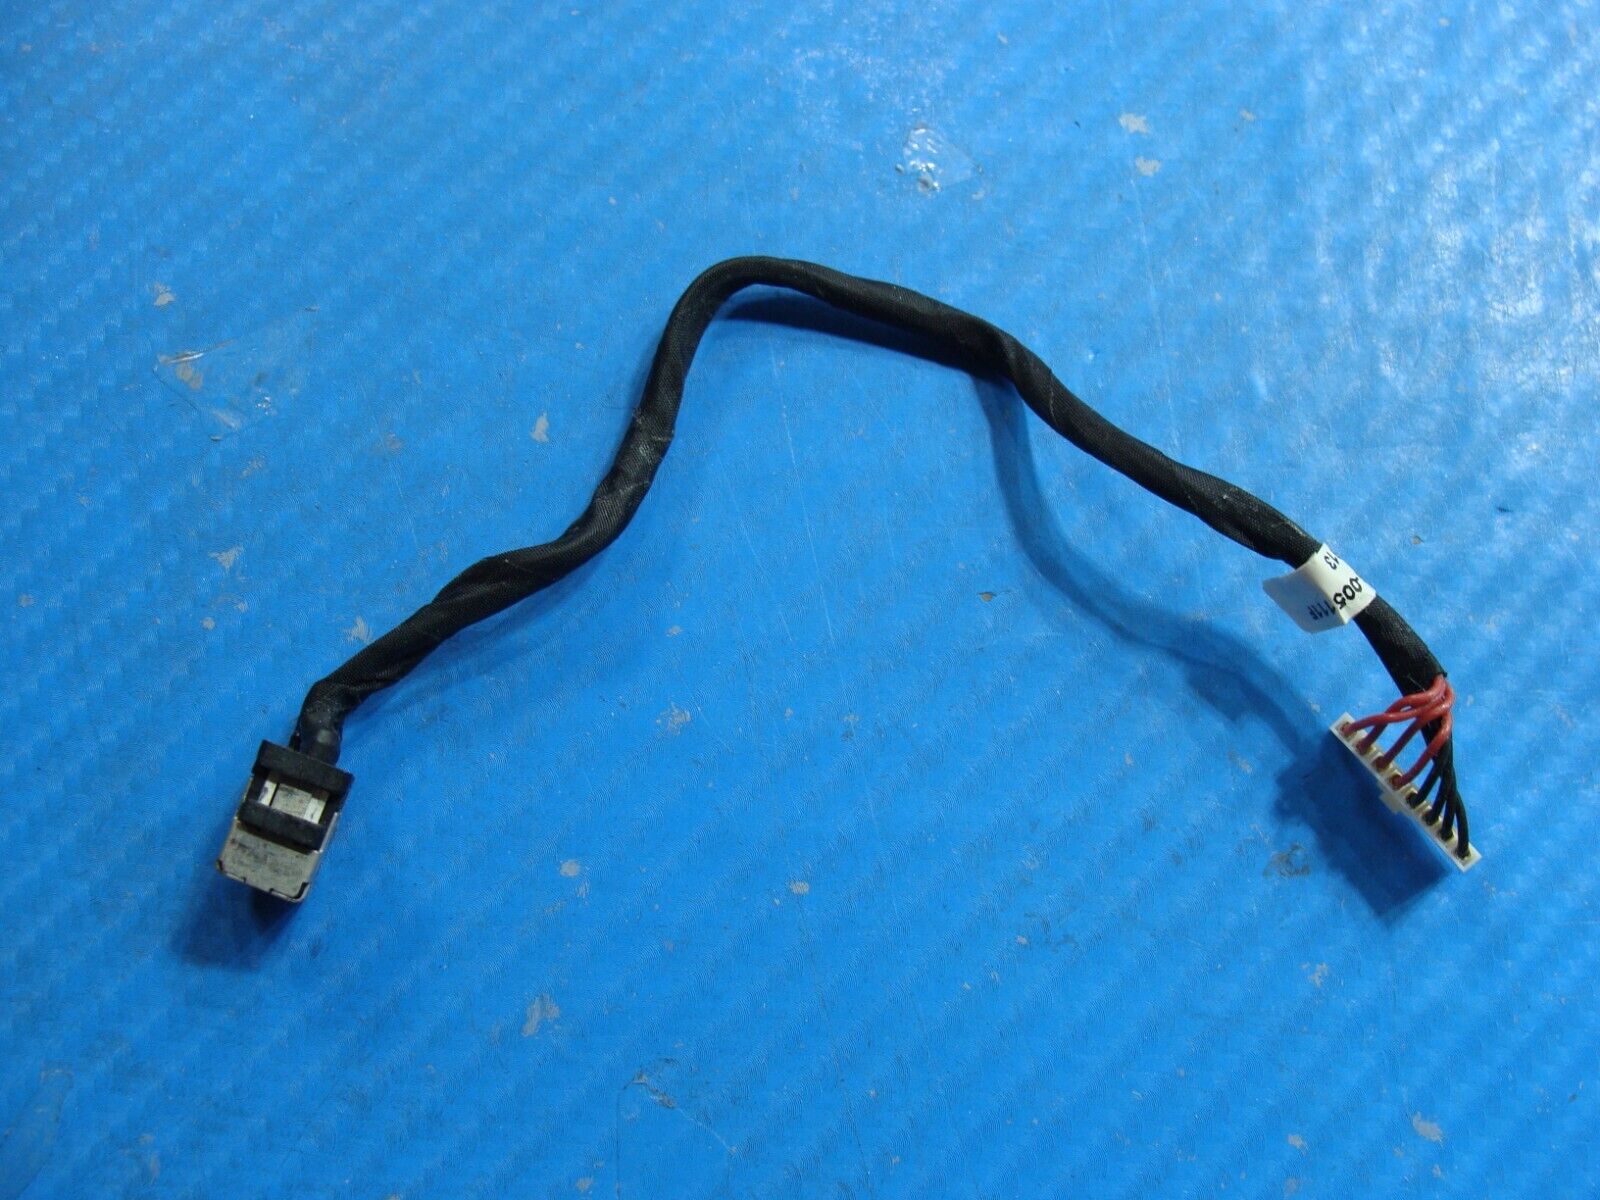 Asus ROG 15.6” GL552VW-DH71 OEM Laptop DC IN Power Jack w/Cable 2DW3156-005111F